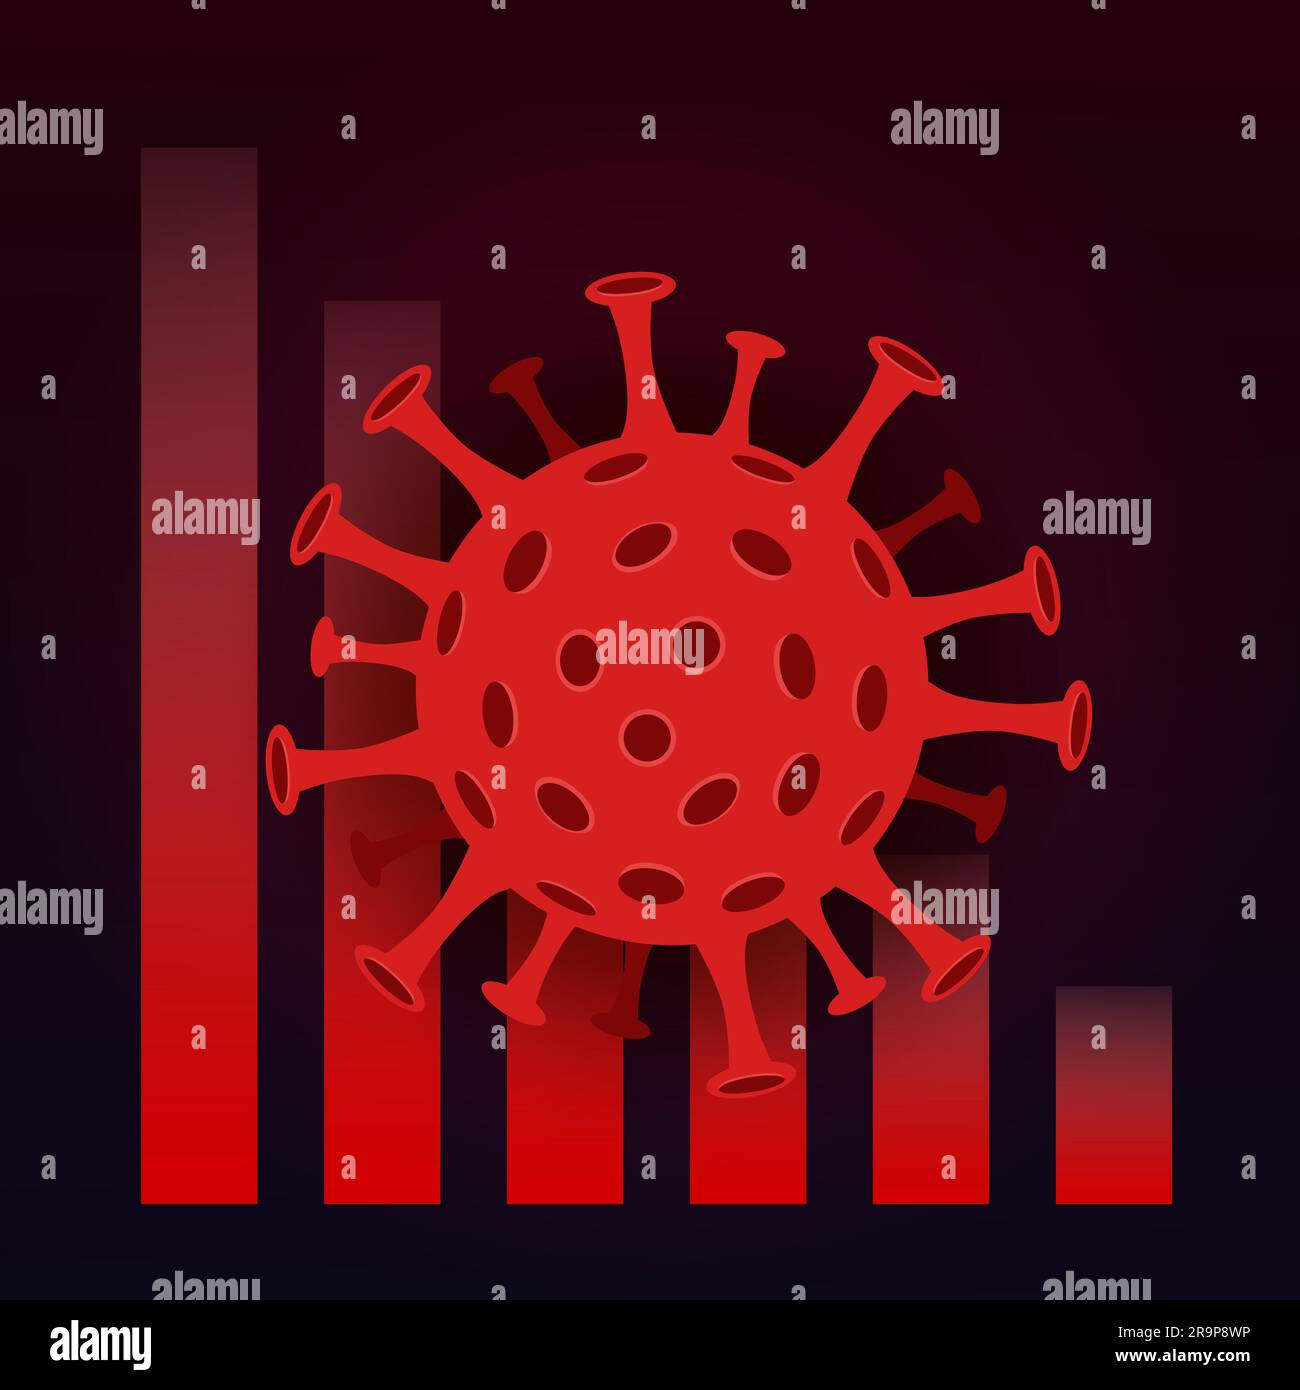 Vector concept illustration of impact of coronavirus on the stock exchange and global economy. Covid-19 virus causes market fall down. Stock Vector